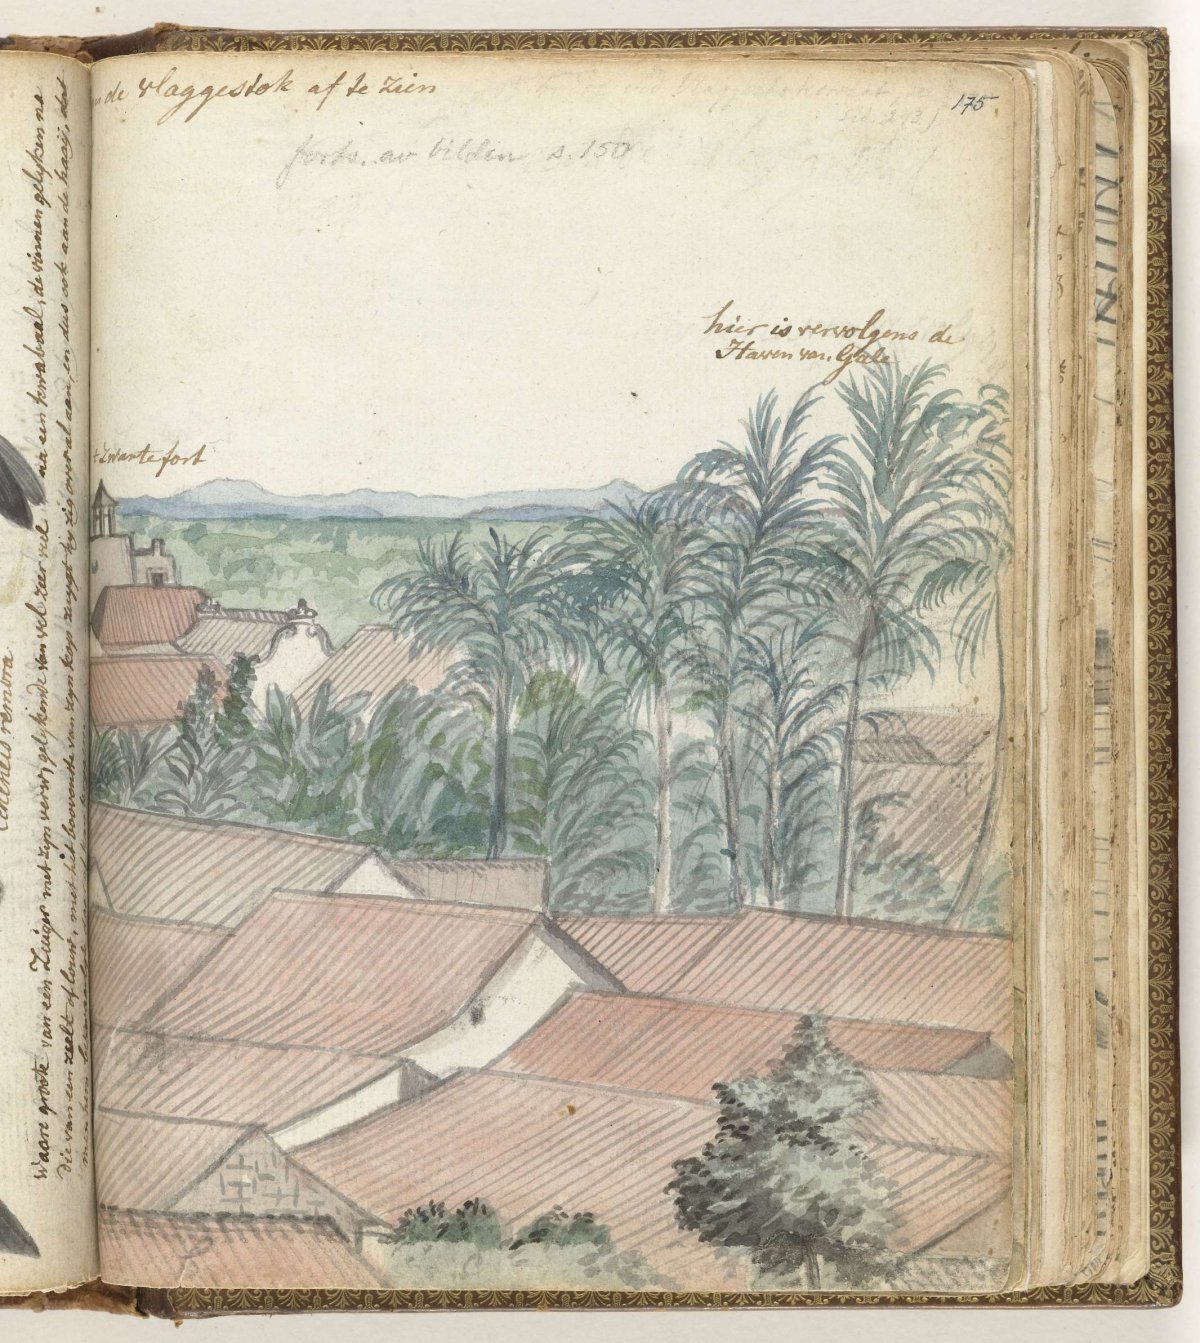 View over Galle, Jan Brandes, 1785 - 1786